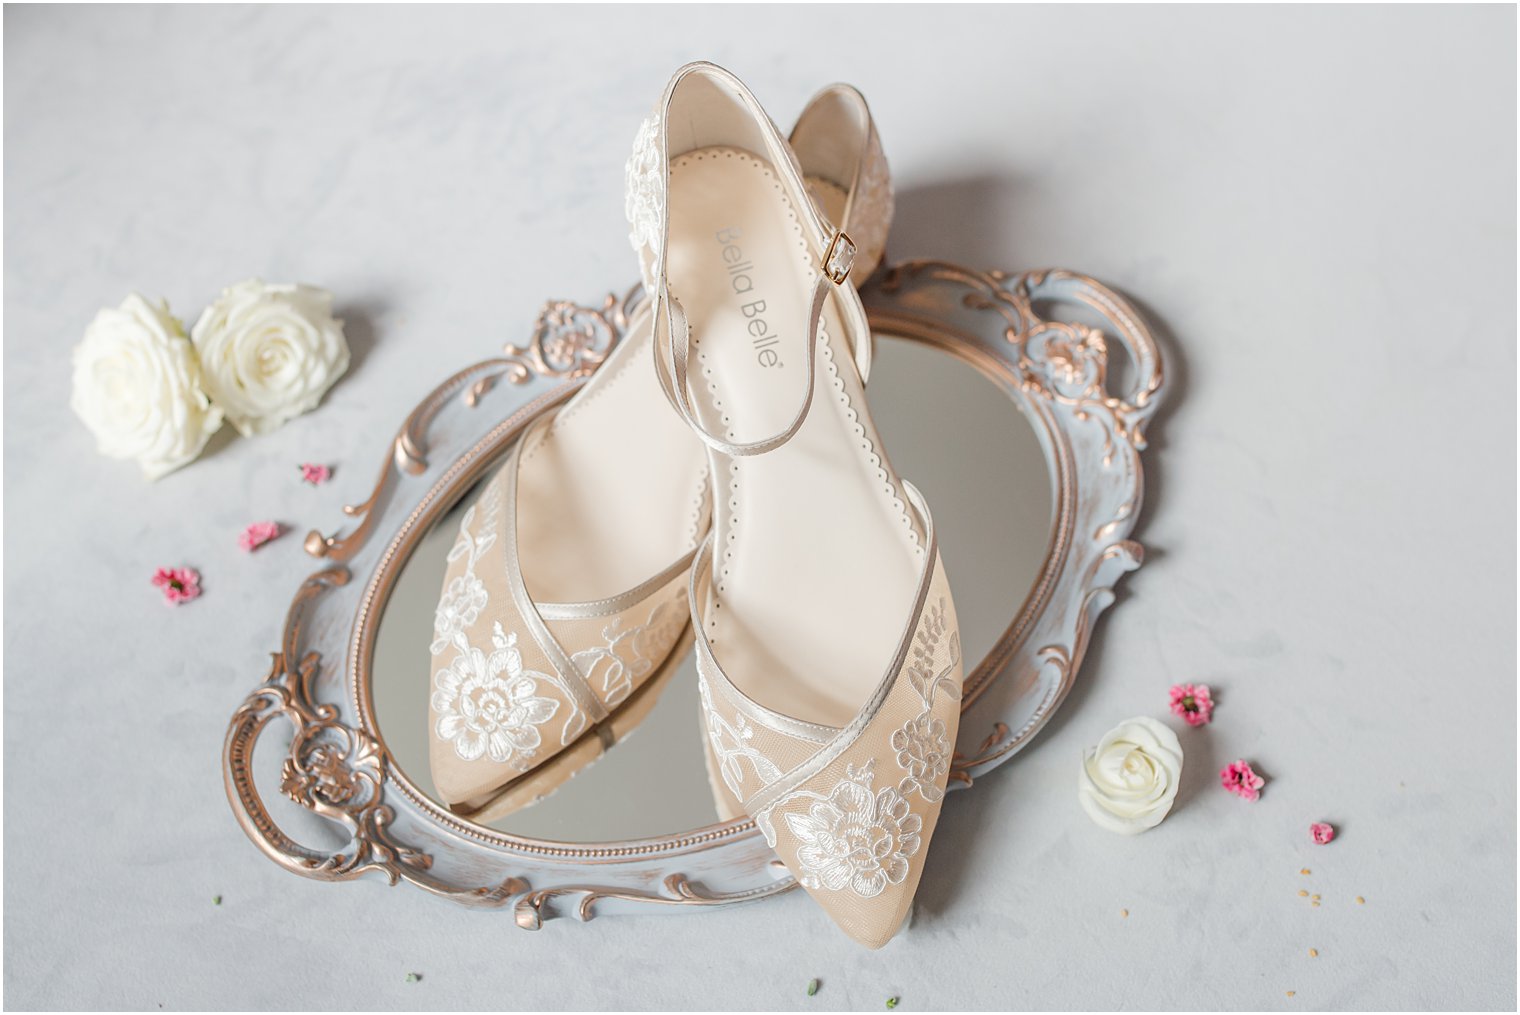 wedding shoes rest on mirrored tray at the English Manor